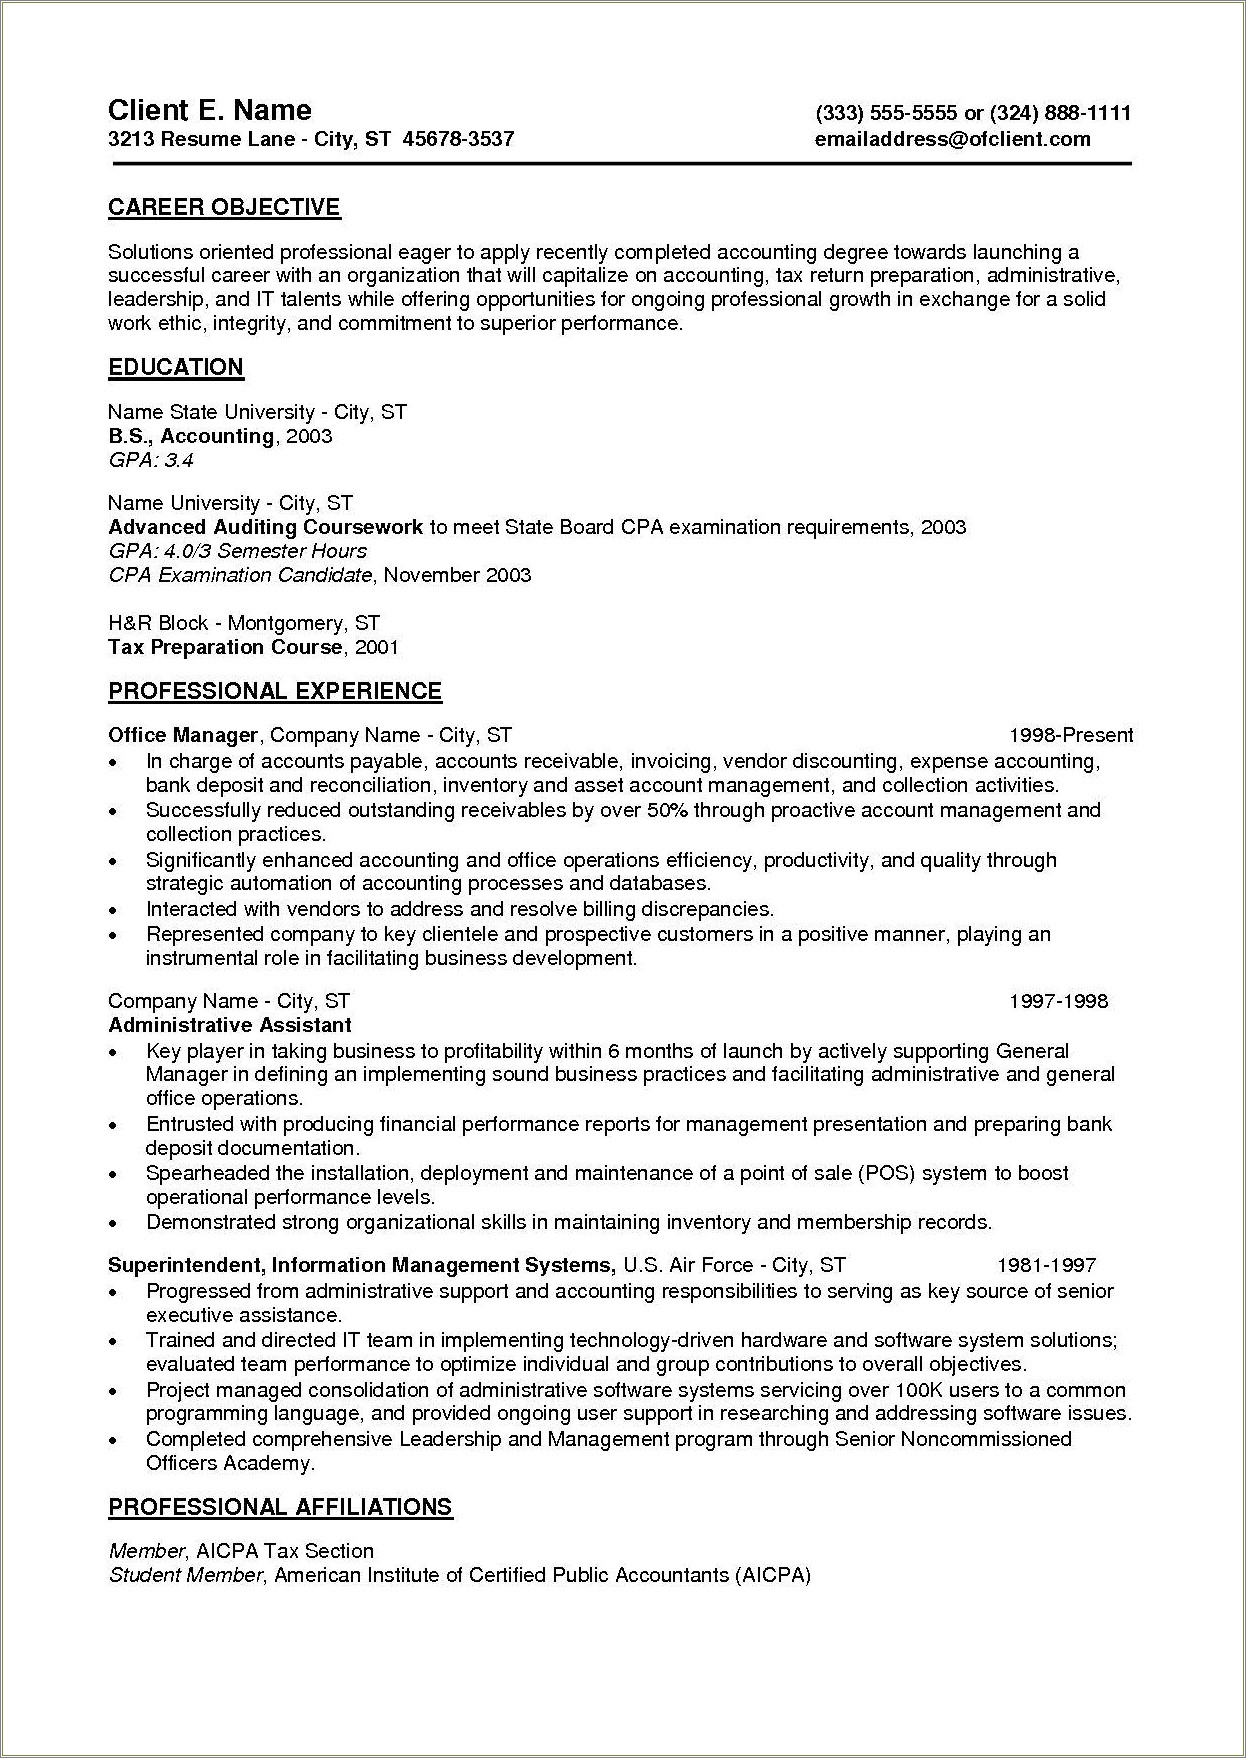 Can You Put Cpa Candidate On Resume